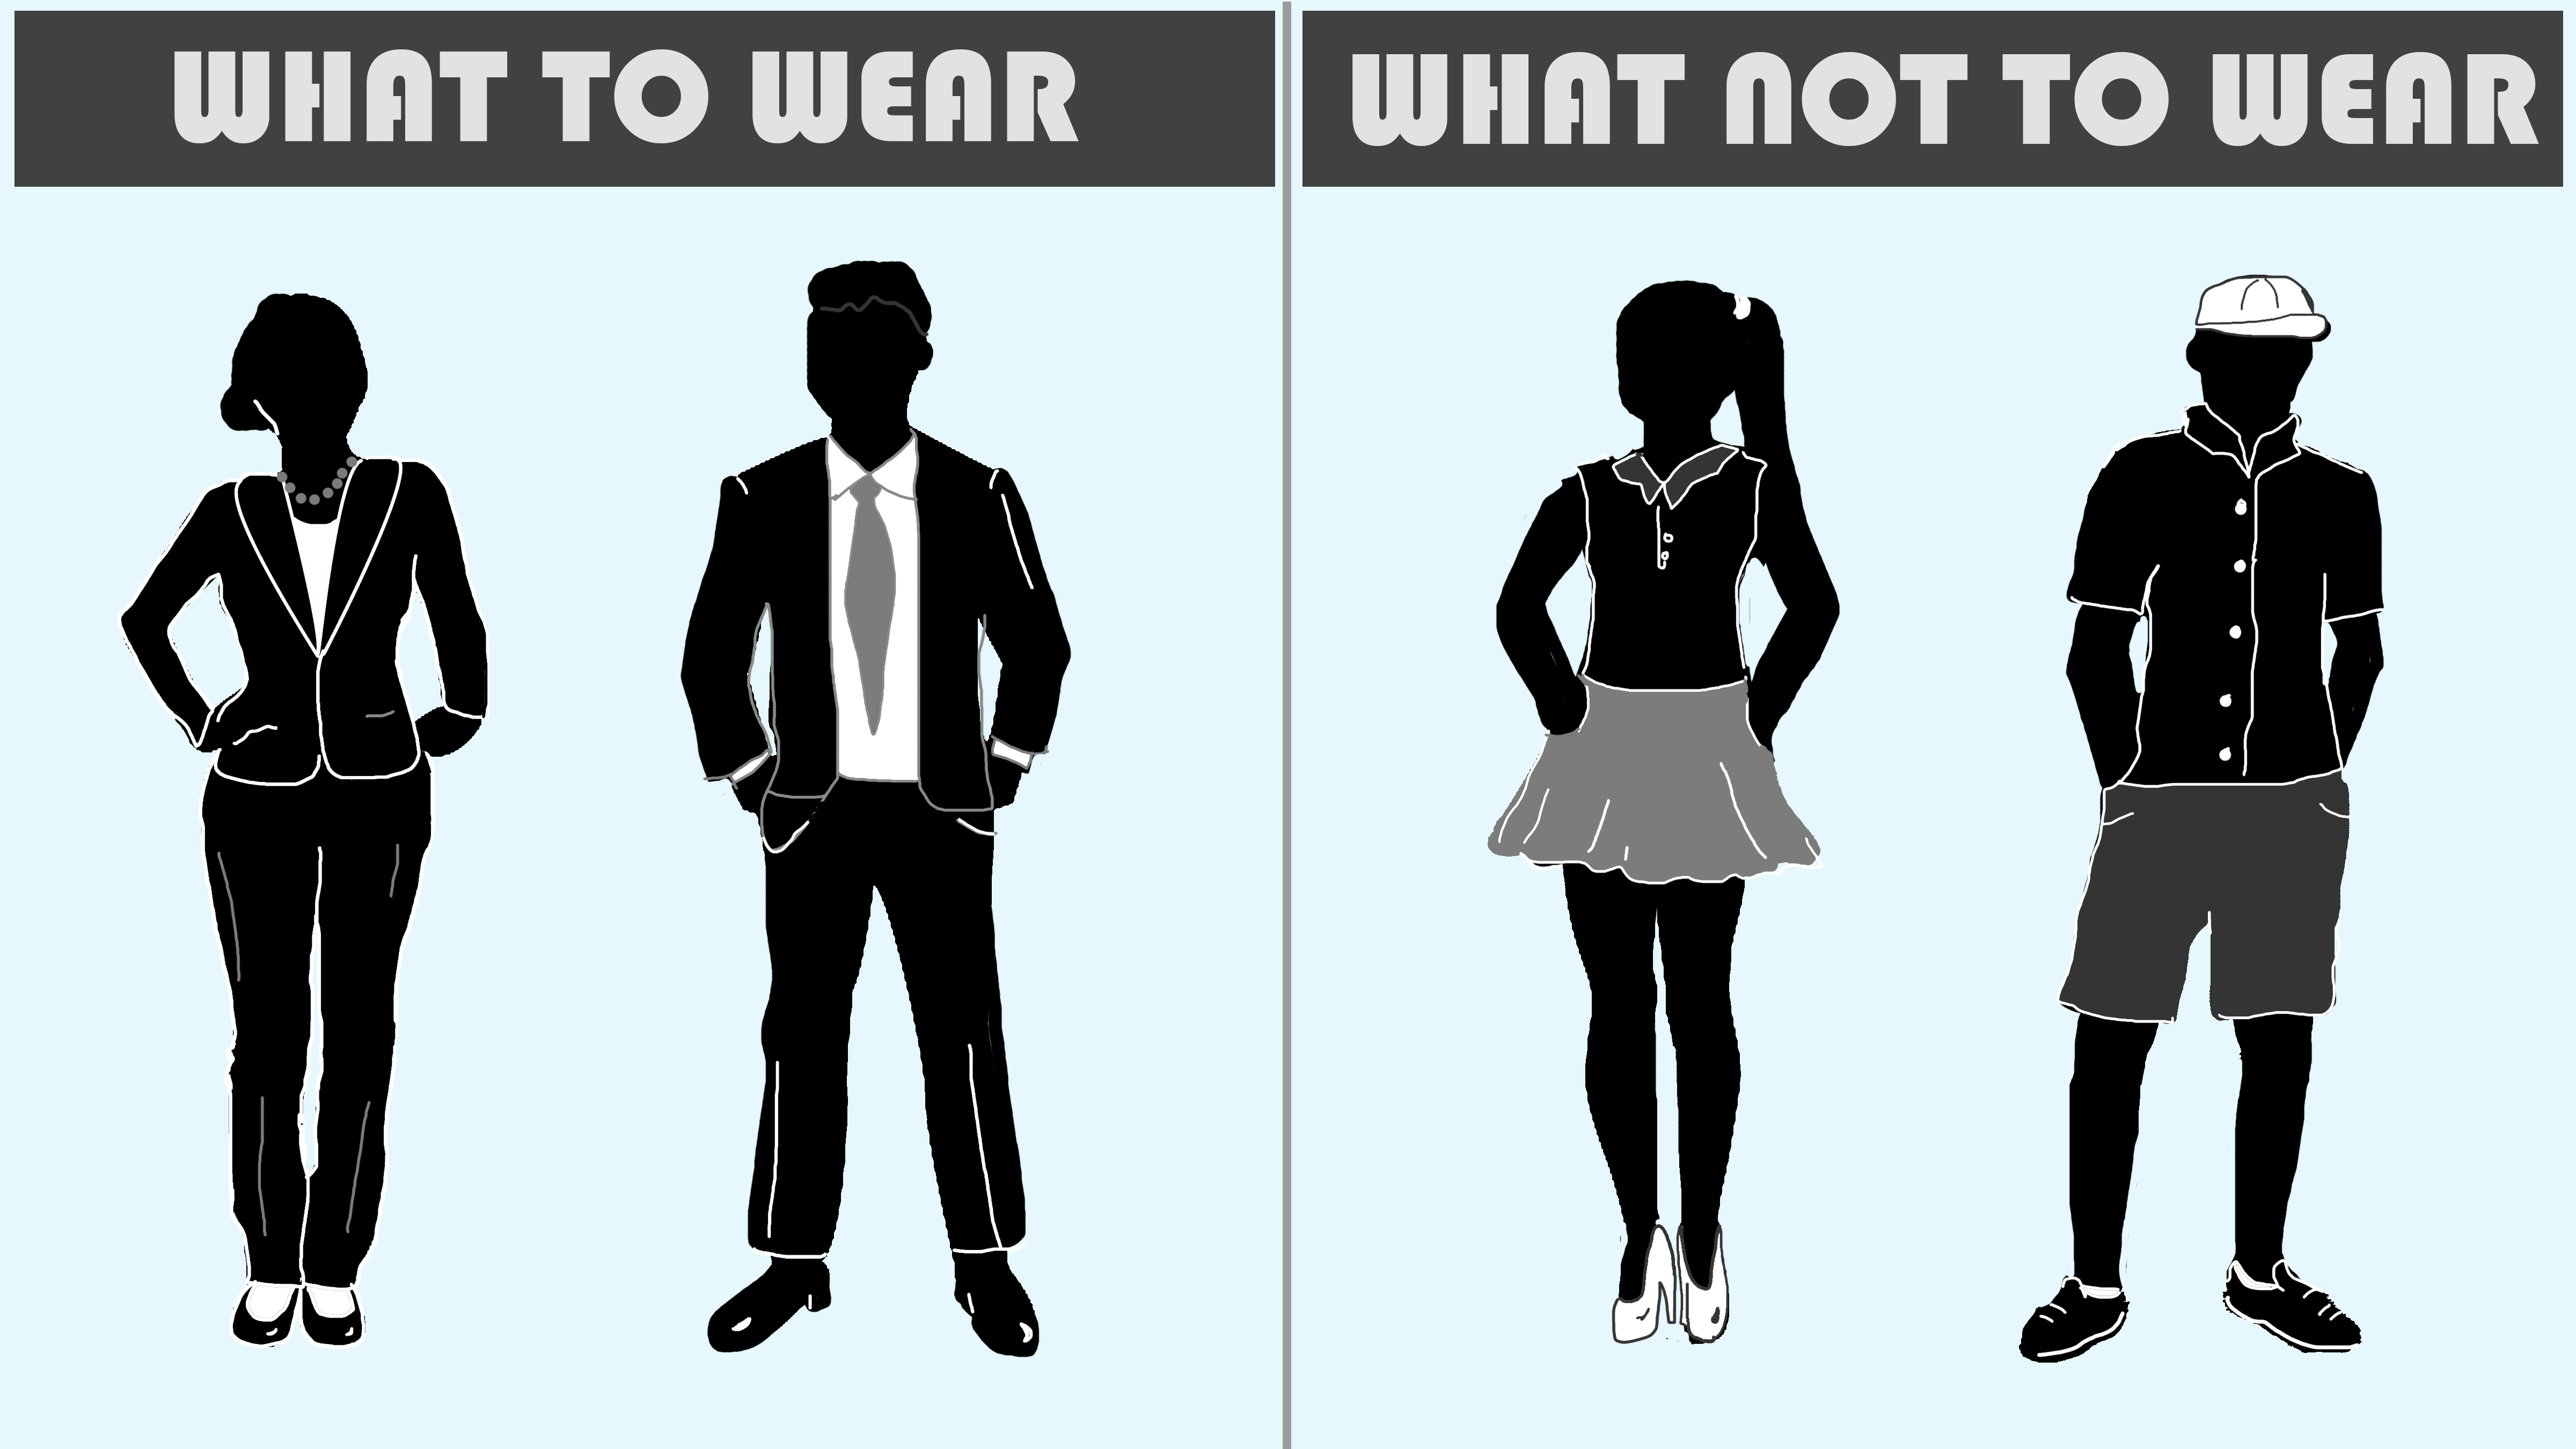 Knowing how to 'dress for success' can aid students while entering